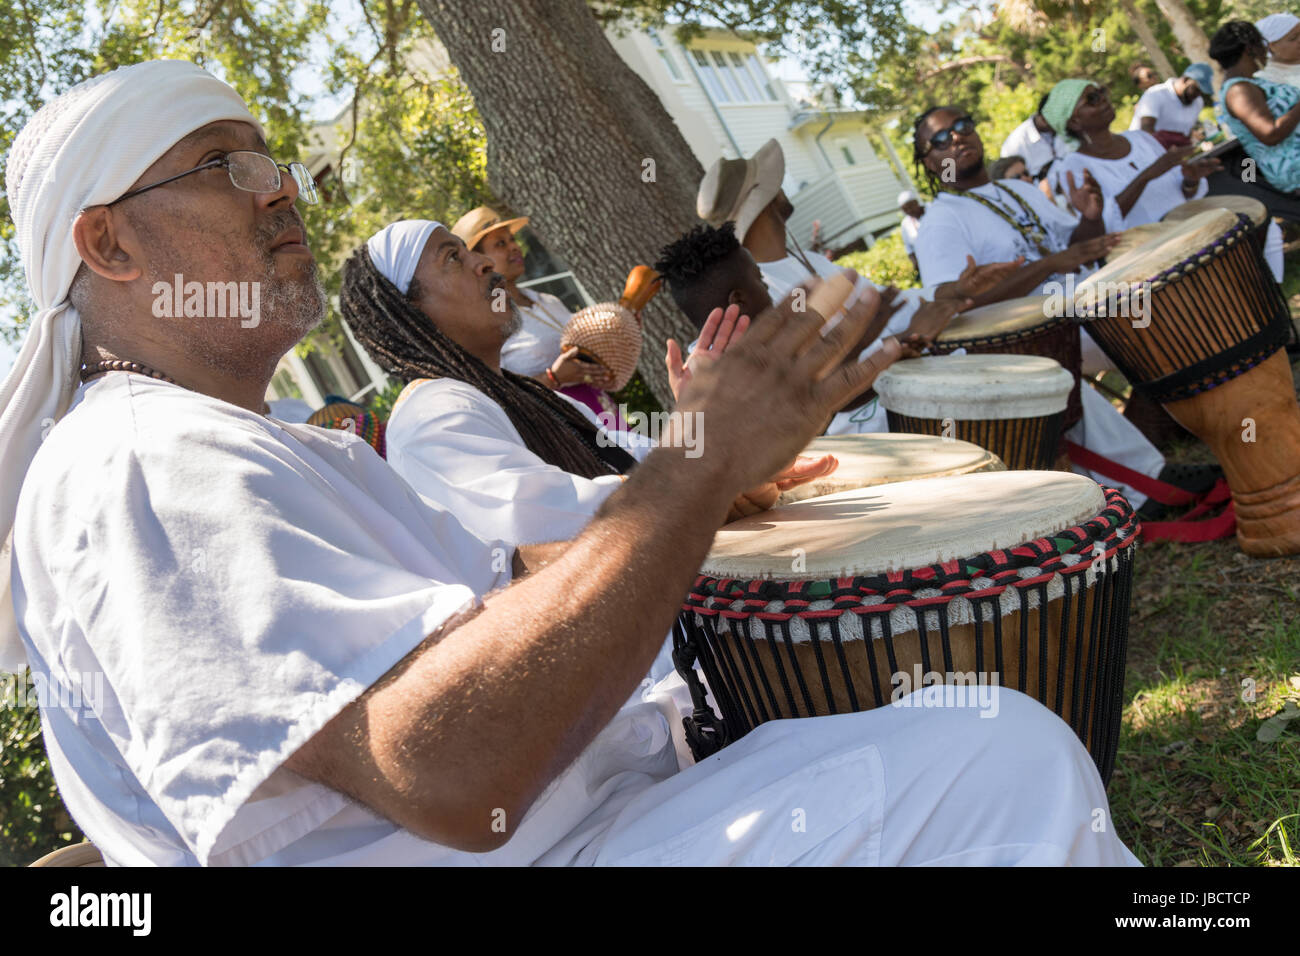 Charleston, South Carolina, USA. 10th June, 2017. Descendants of enslaved Africans brought to Charleston in the Middle Passage hold a drum circle to honor their relatives lost during a remembrance ceremony at Fort Moultie National Monument June 10, 2017 in Sullivan's Island, South Carolina. The Middle Passage refers to the triangular trade in which millions of Africans were shipped to the New World as part of the Atlantic slave trade. An estimated 15% of the Africans died at sea and considerably more in the process of capturing and transporting. Credit: Planetpix/Alamy Live News Stock Photo